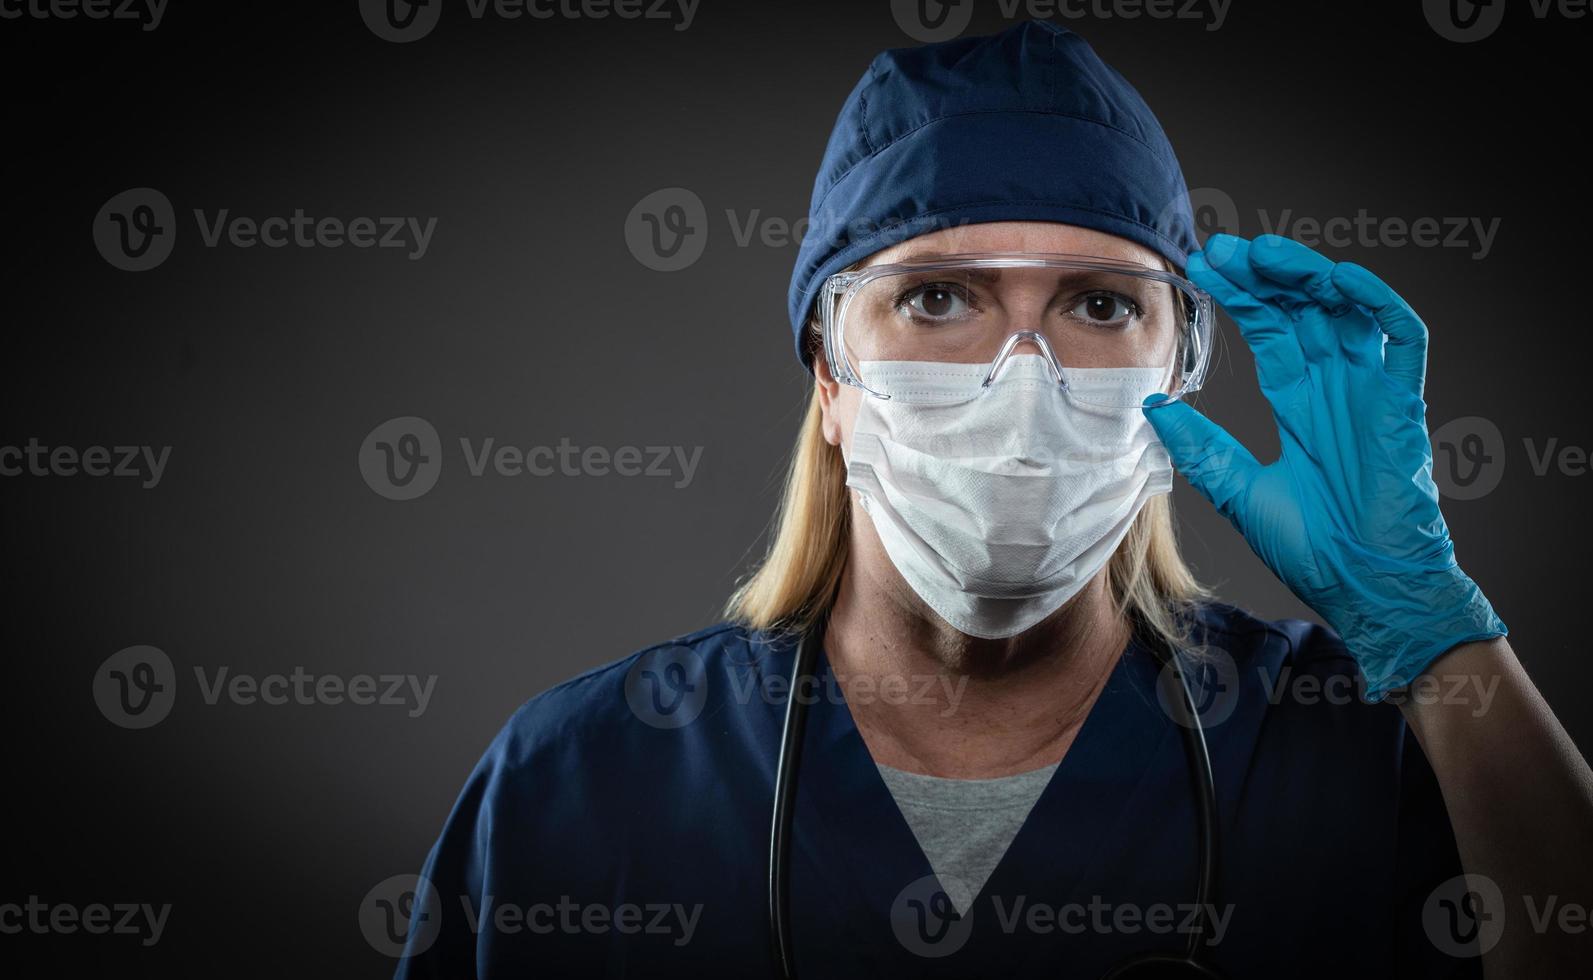 Female Medical Worker Wearing Protective Face Mask and Gear Against Dark Background photo